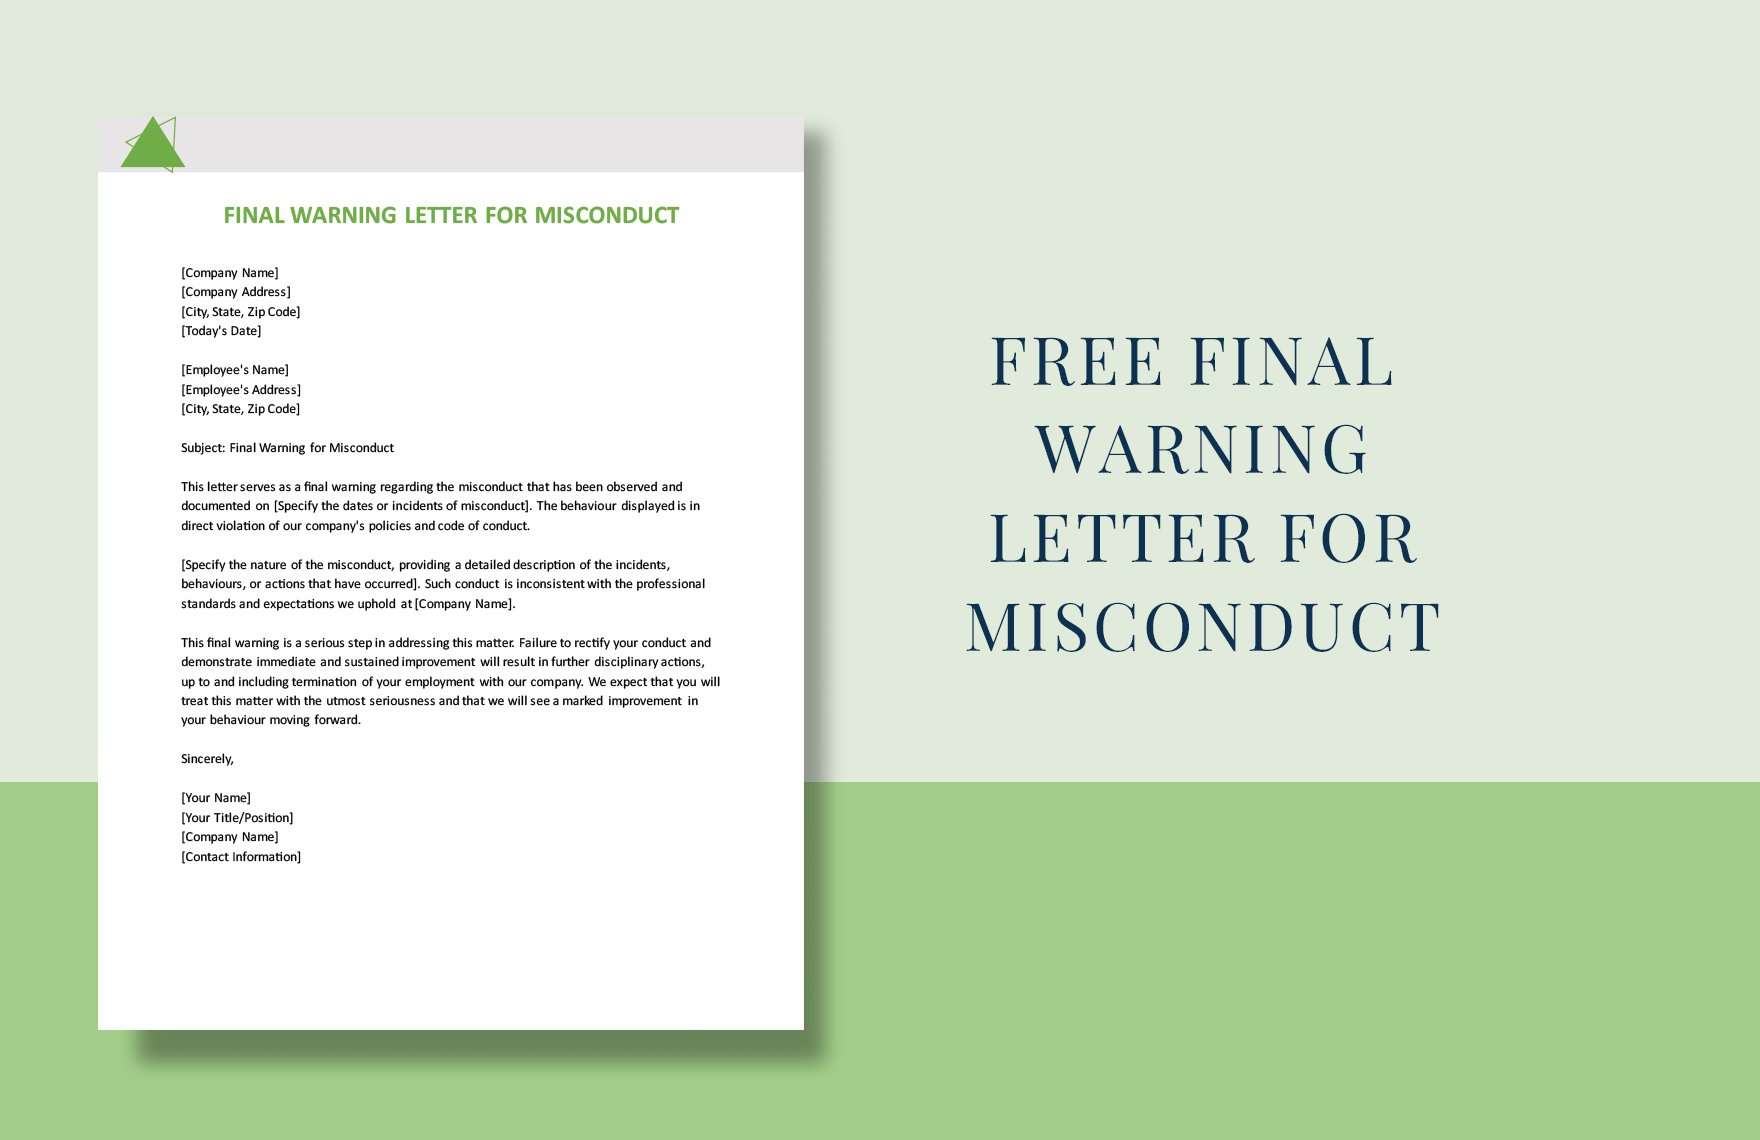 Final Warning Letter For Misconduct